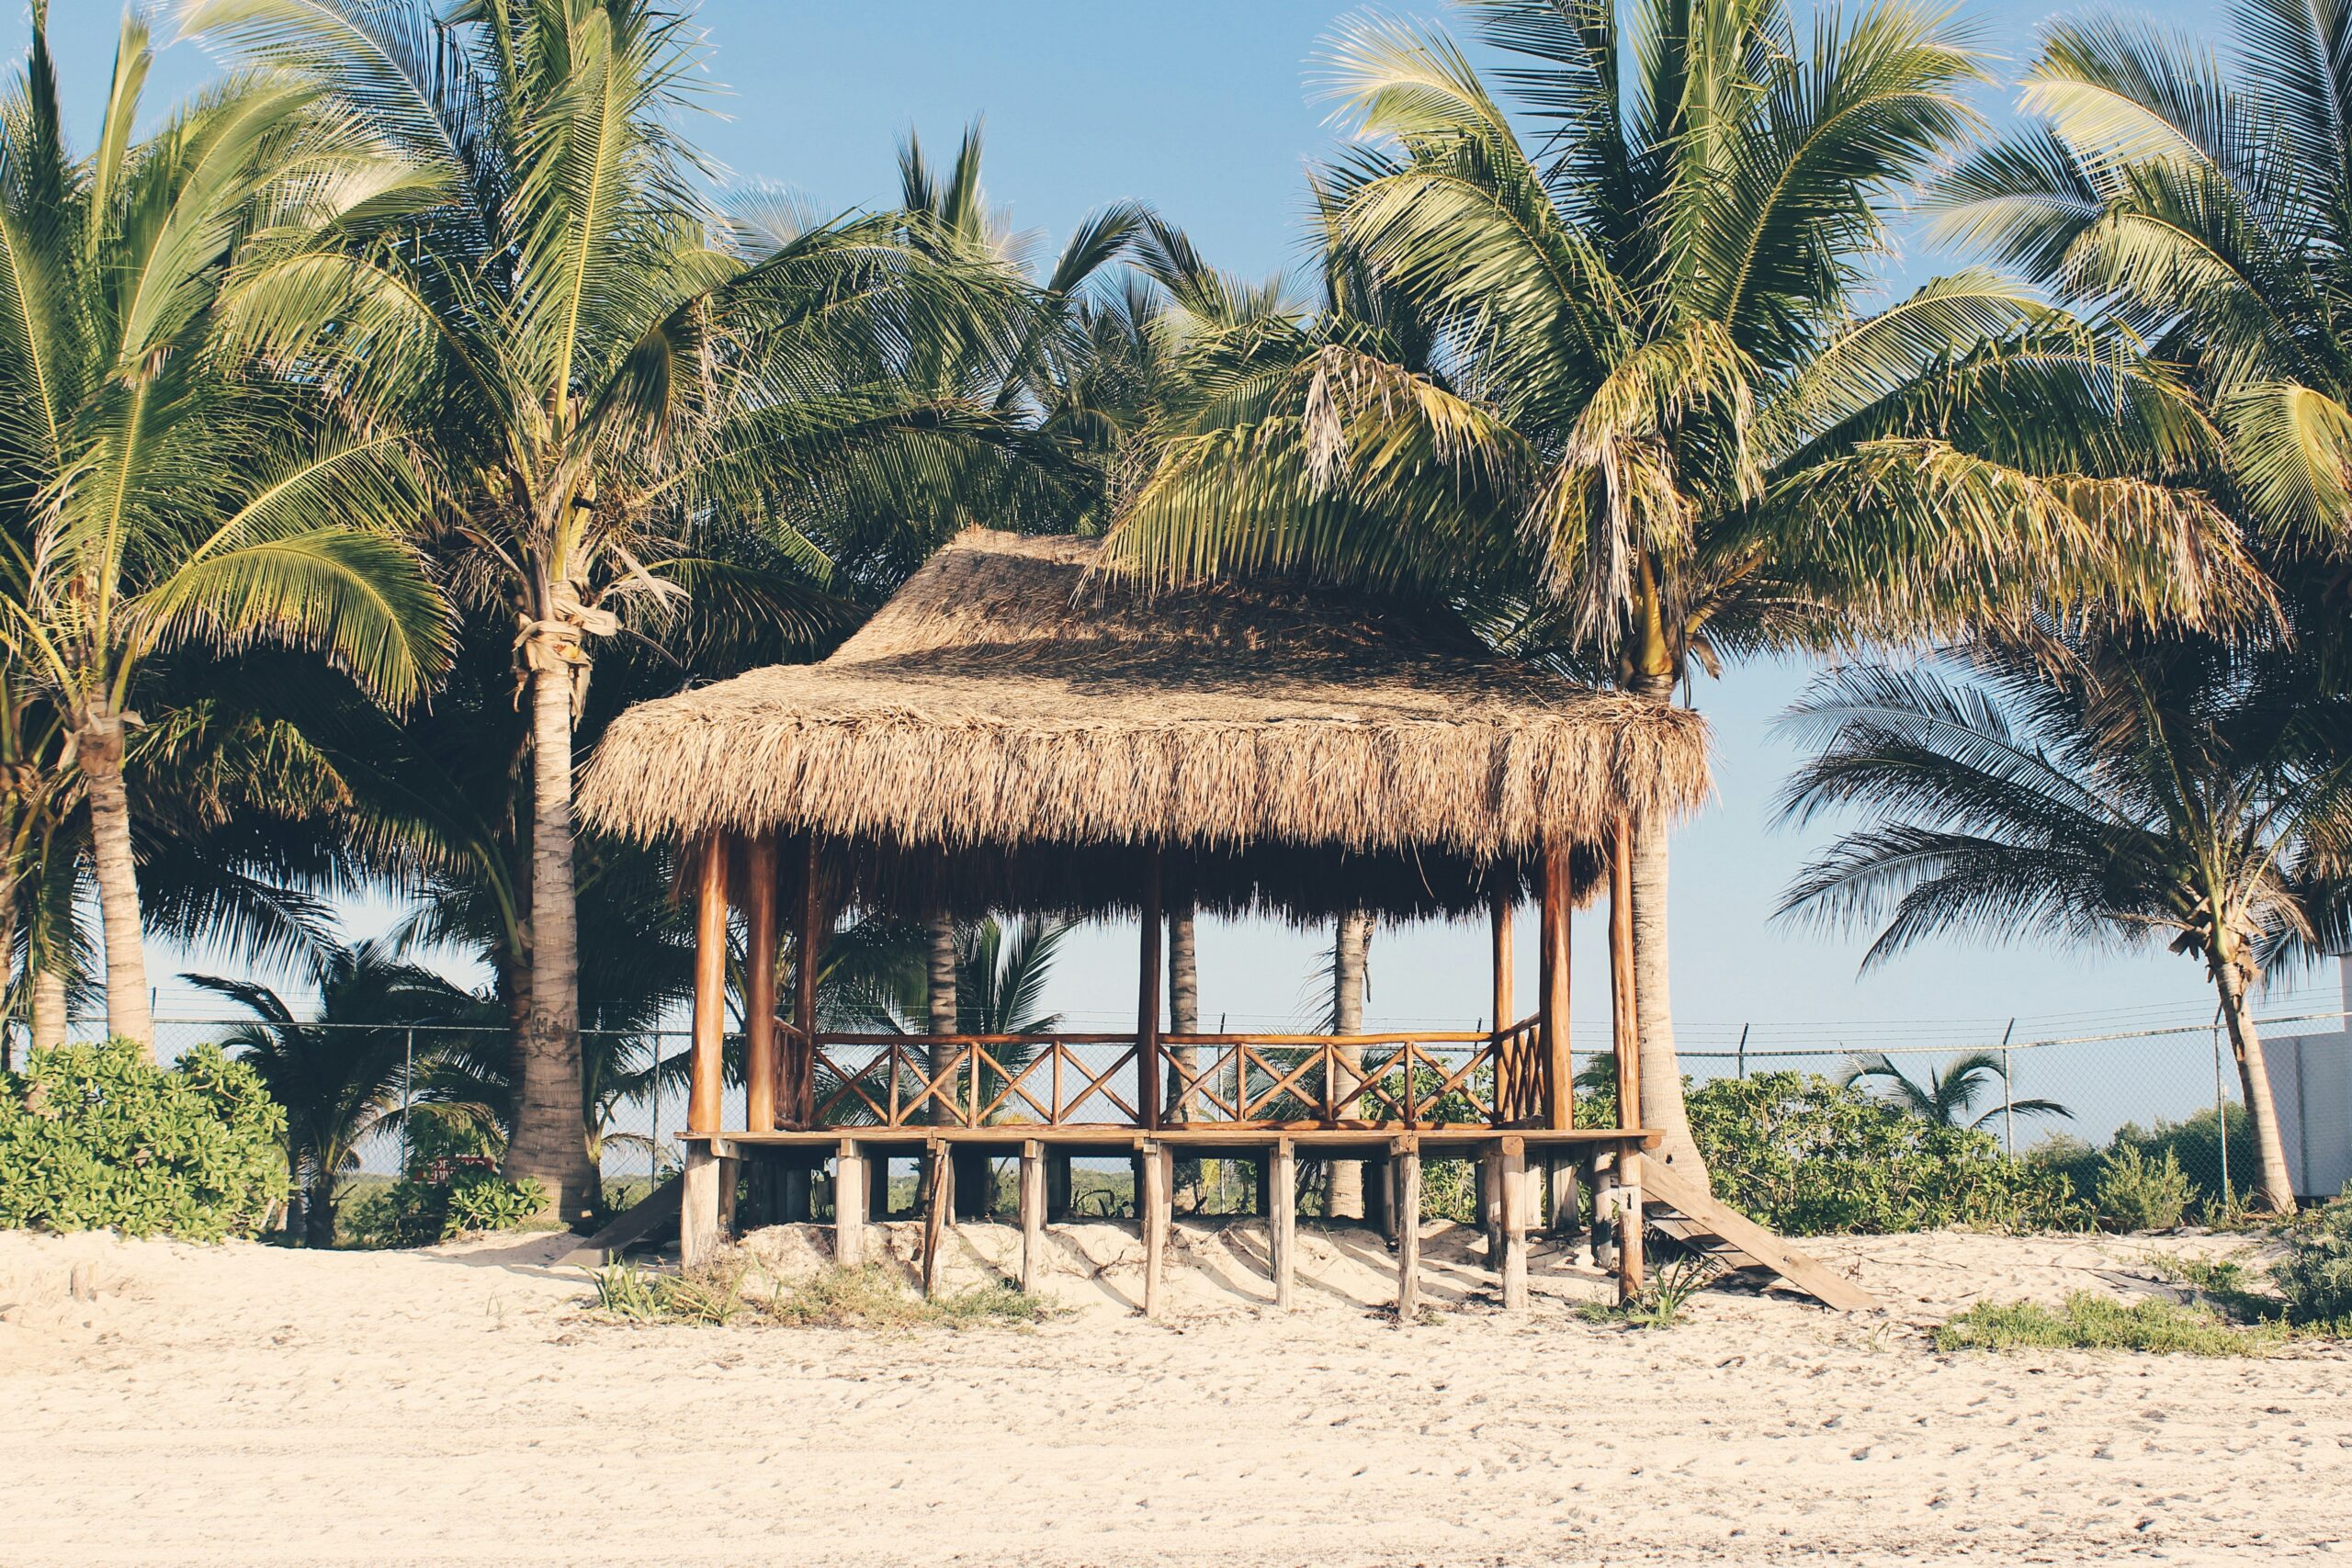 Check out these tips on staying safe while in Playa del Carmen.
pictured: a straw hut on a Playa del Carmen beach 